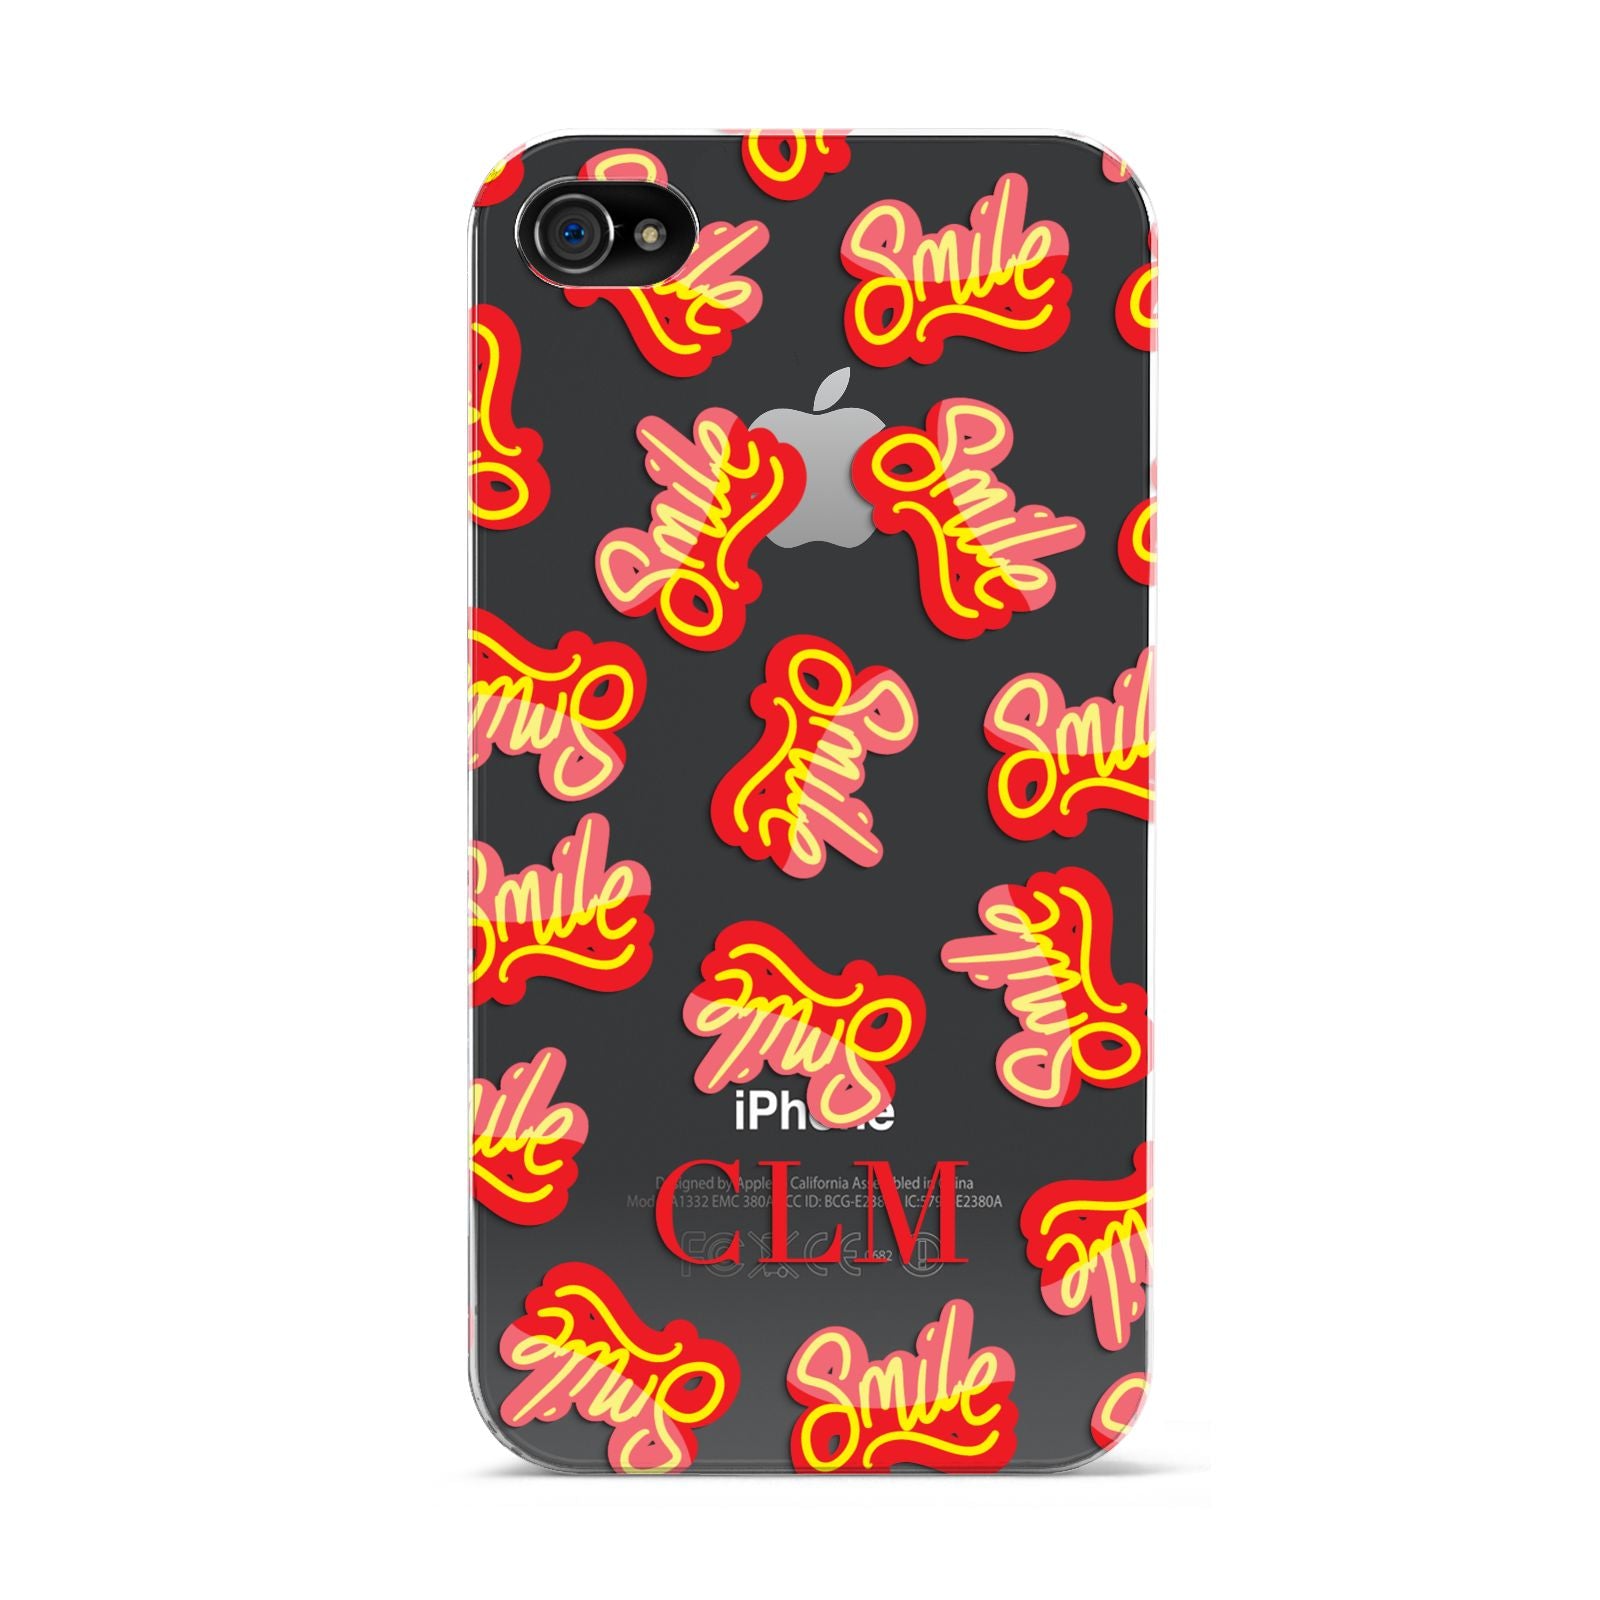 Personalised Smile Initials Clear Apple iPhone 4s Case